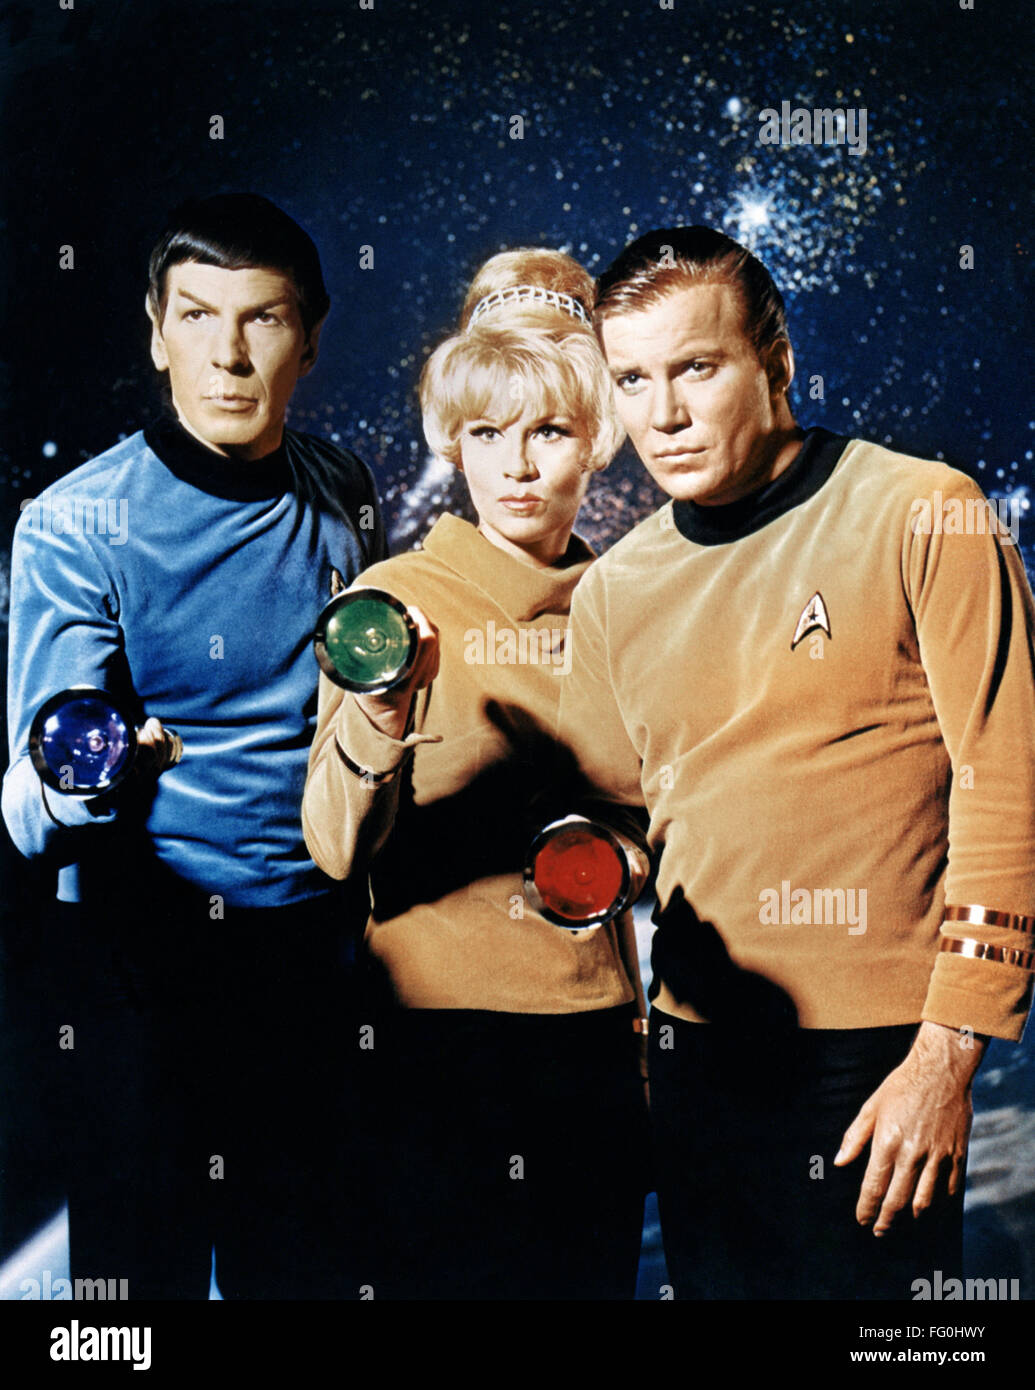 STAR TREK, 1966. /nLeft to right: Leonard Nimoy as Mr. Spock, Grace Lee Whitney as Yeoman Janice Rand, and William Shatner as Captain James Kirk, holding colored flashlights in a publicity still for the American television series 'Star Trek,' 1966. Stock Photo